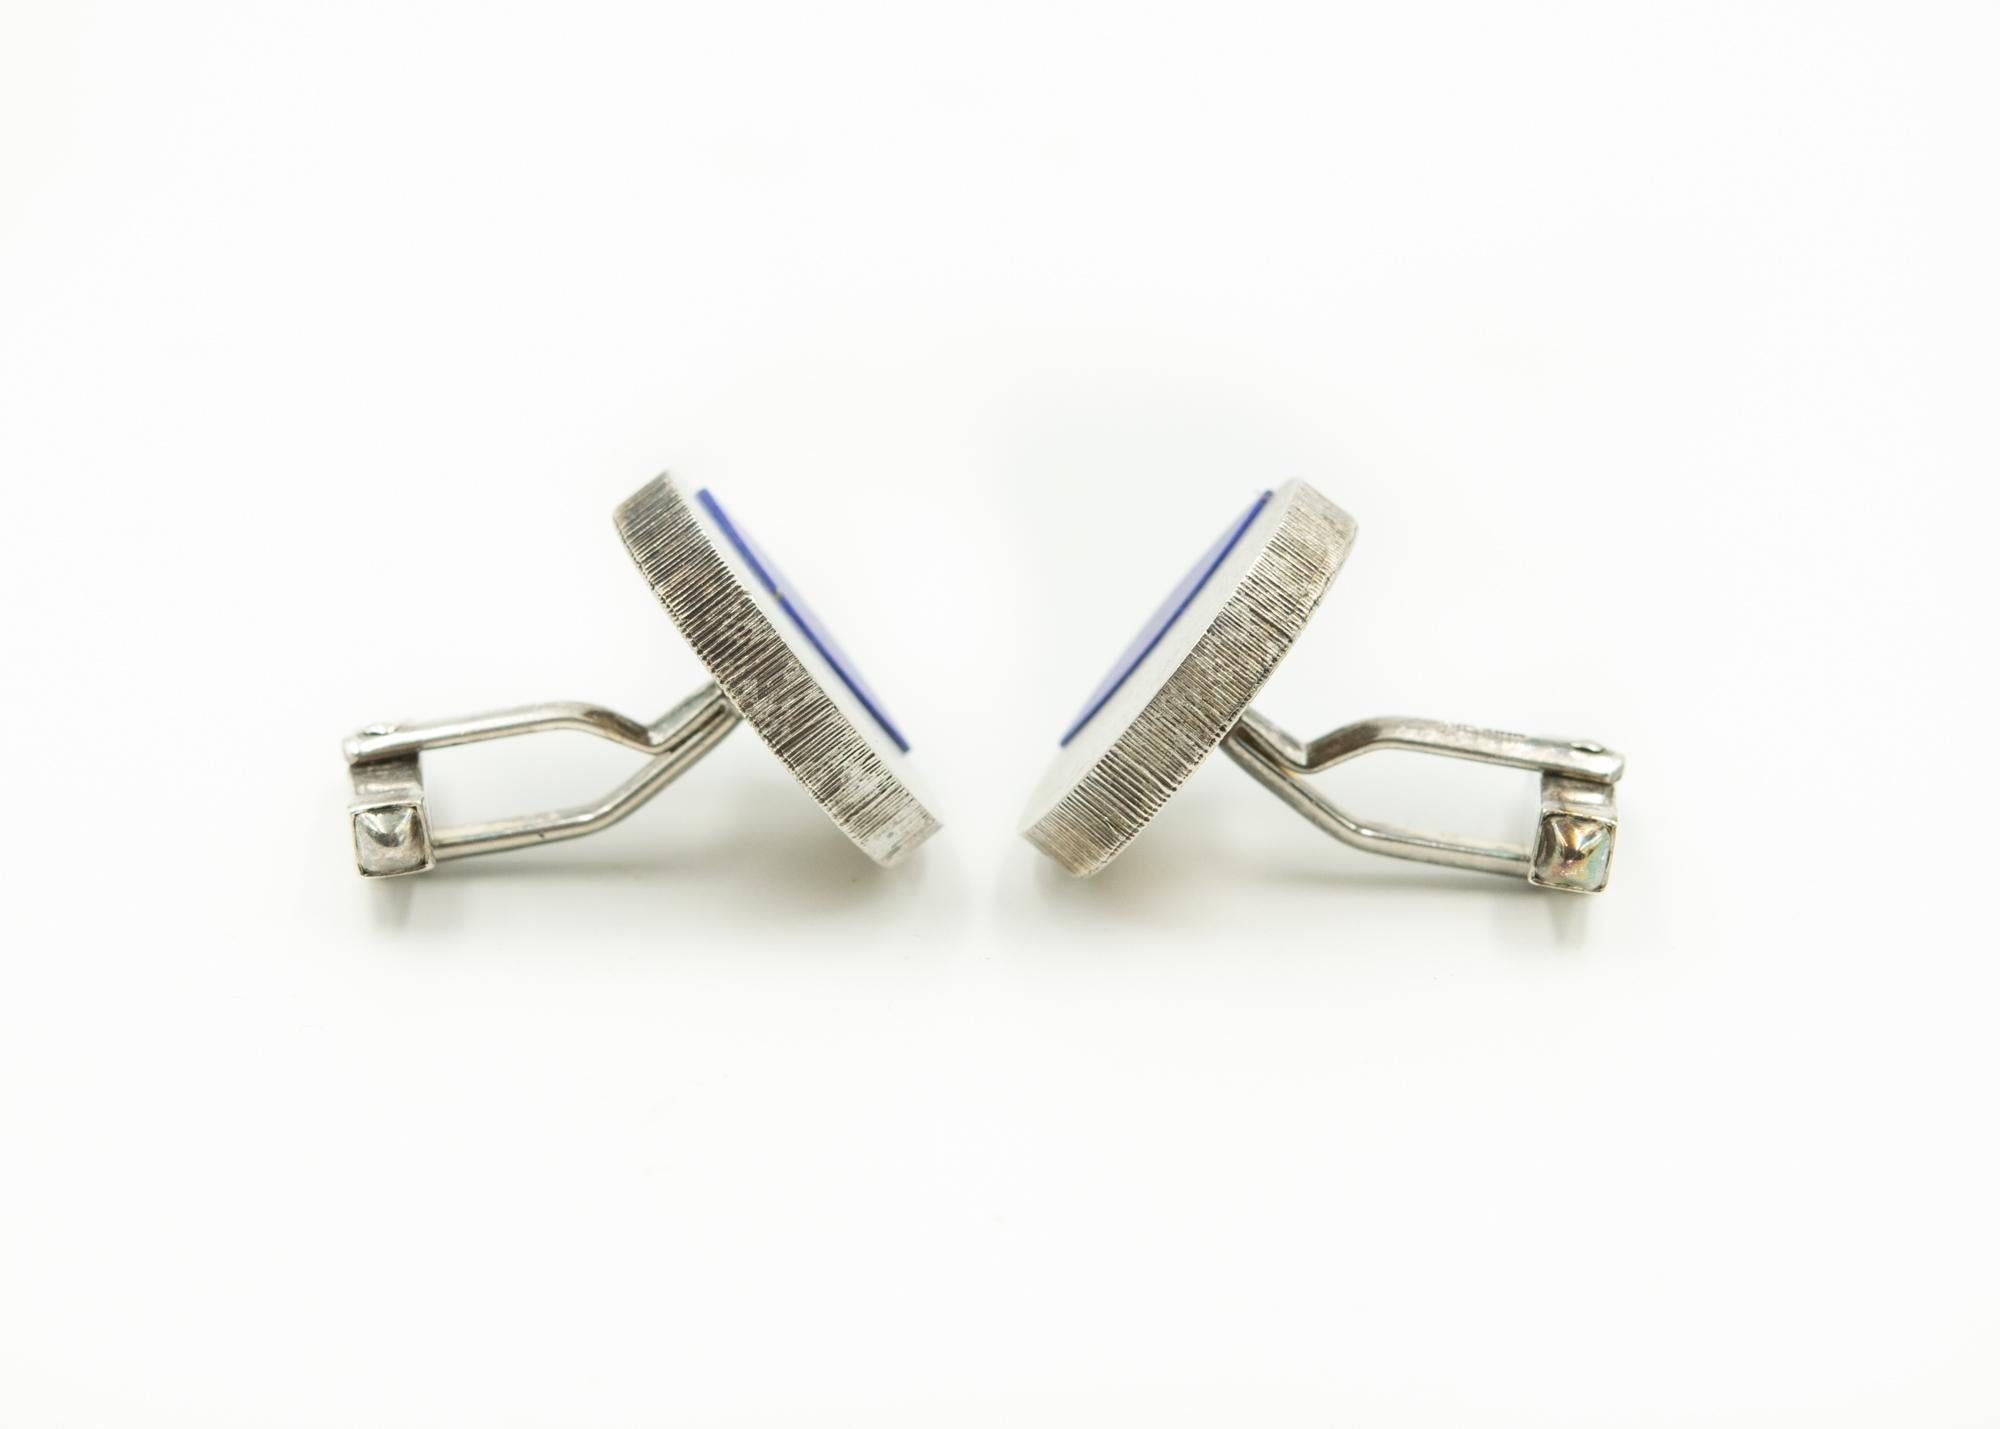 Modernist German sterling silver round cufflinks featuring inlaid lapis lazuli set in a matte finished sterling circle.  The backs are bullet backs.

On the backs they are marked sterling & Germany.